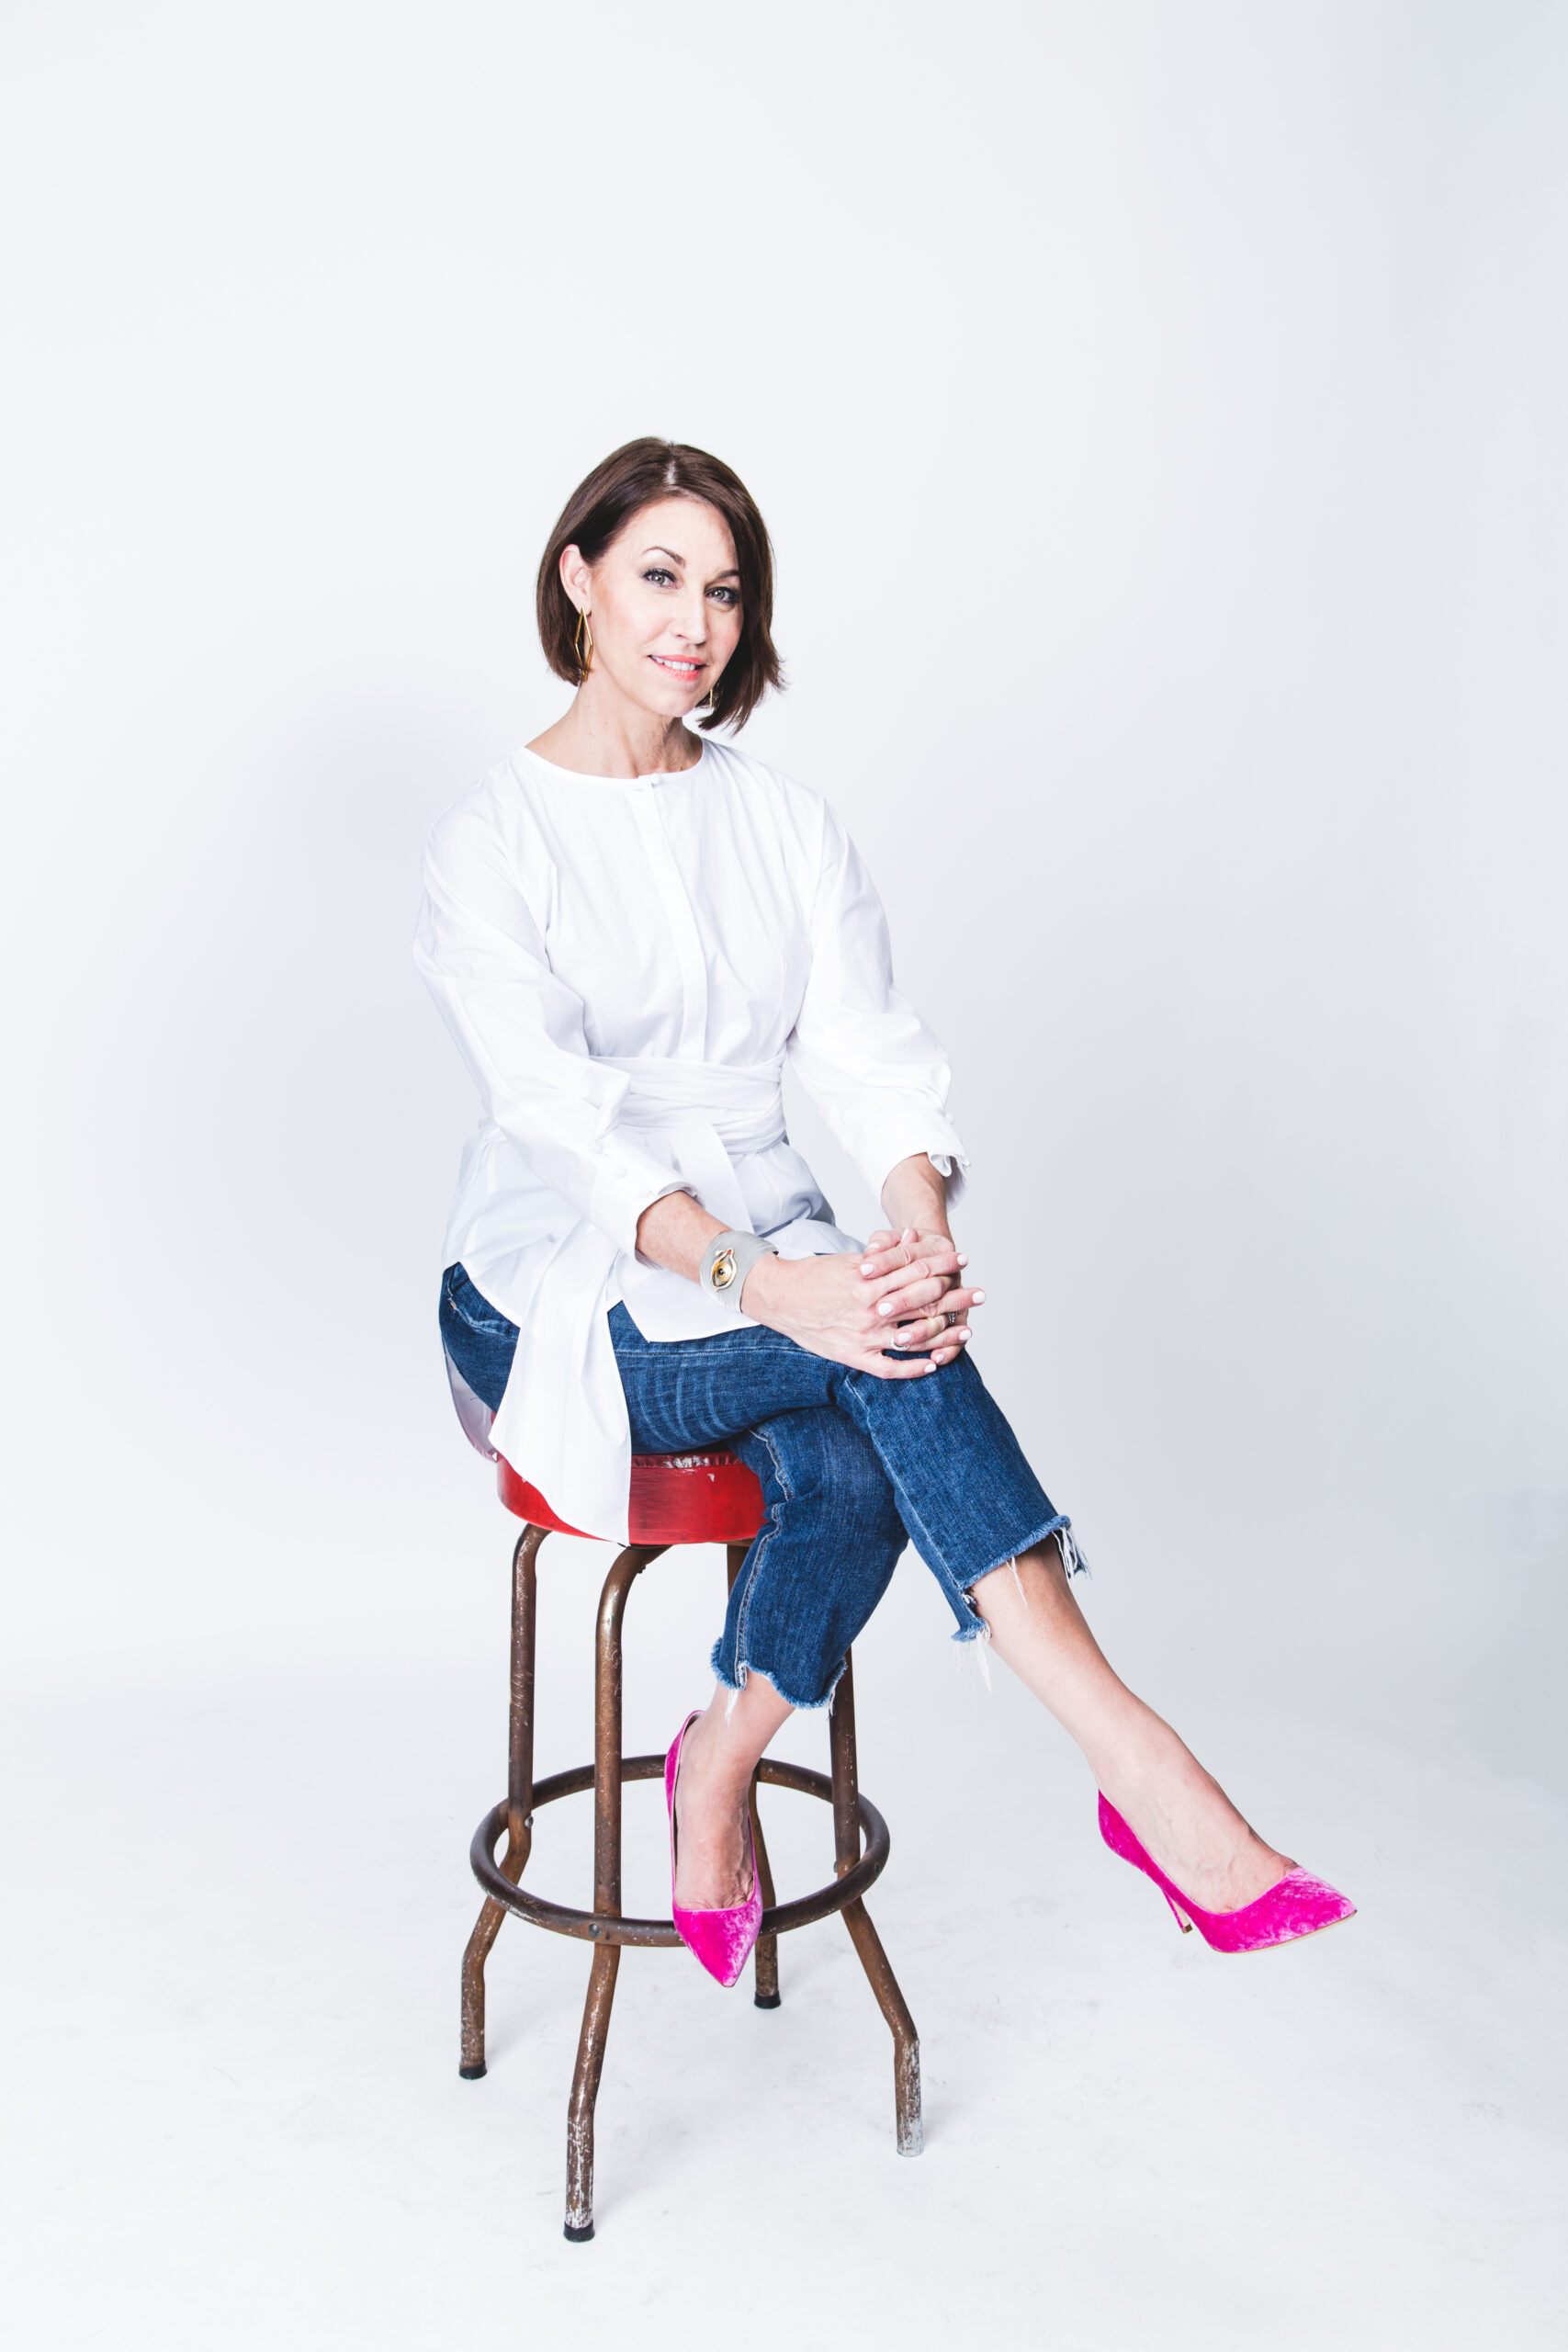 Alison Bruhn sits on a stool, dressed in a white blouse and jeans. She pairs her outfit with pink shoes and has short dark hair, all set against a white background.